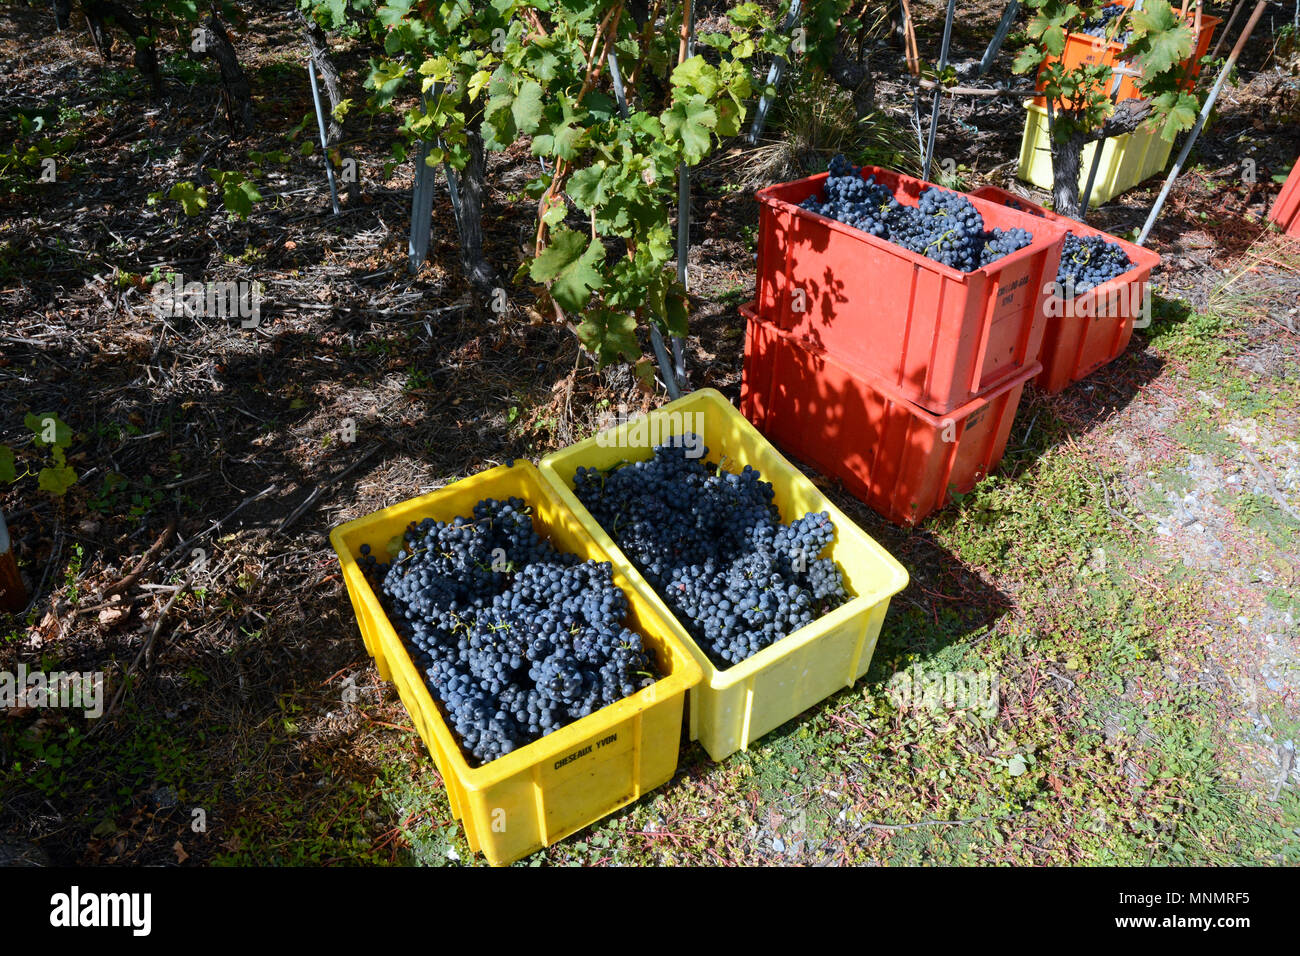 Bins filled with red wine grapes in a vineyard during the harvest season near the town of Chamoson, Rhone Valley, Canton of Valais, Switzerland. Stock Photo